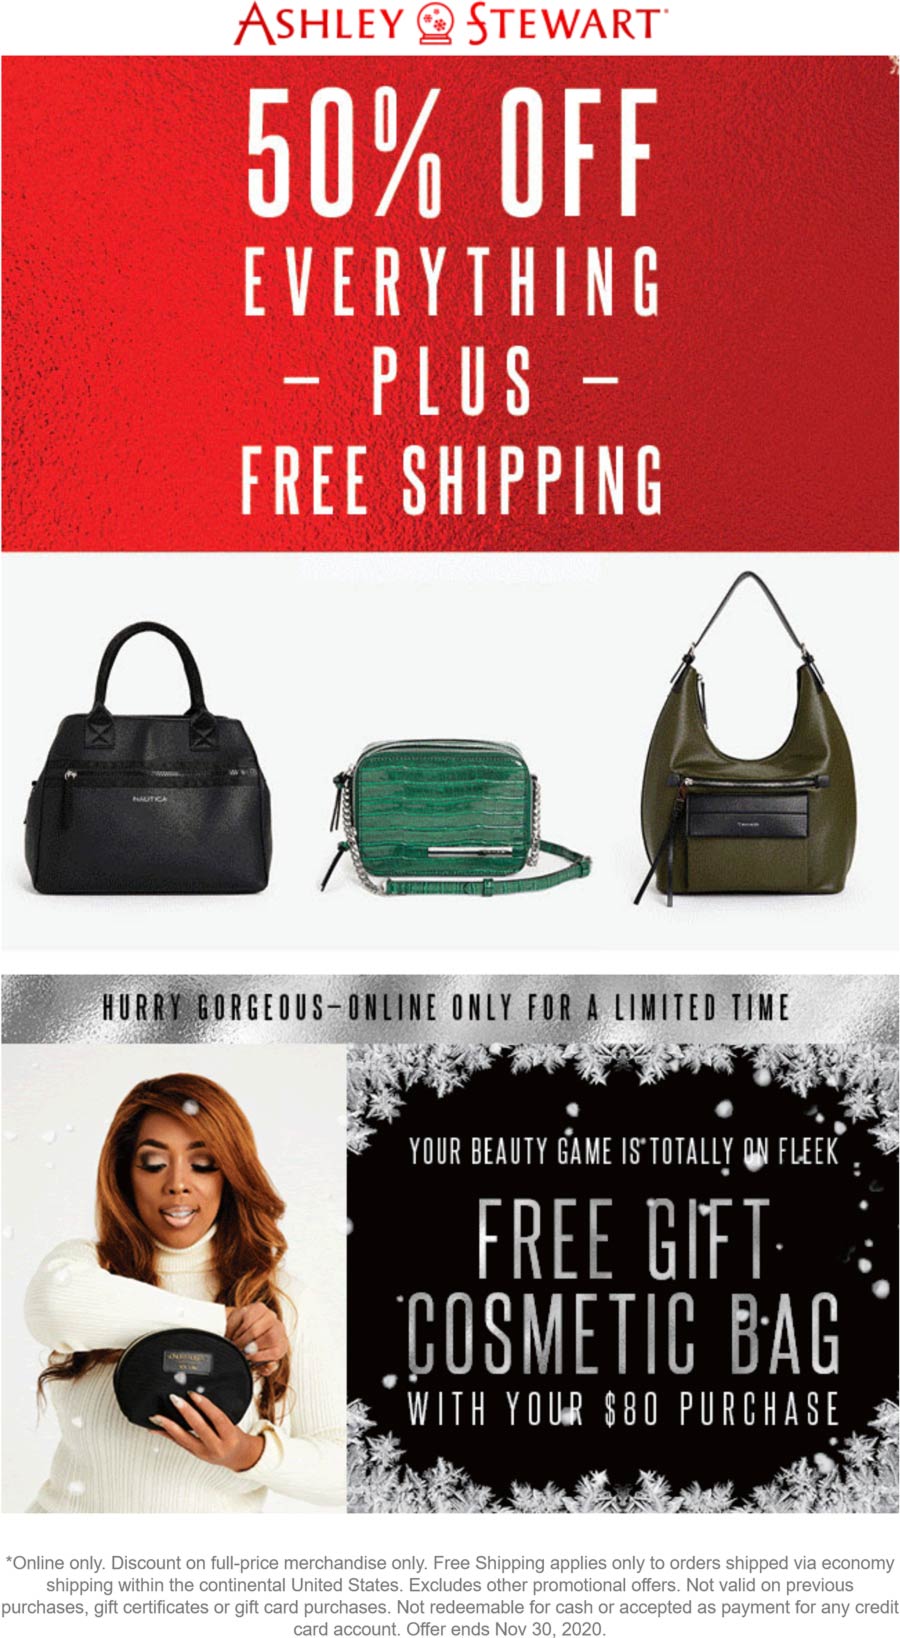 Ashley Stewart stores Coupon  50% off everything today at Ashley Stewart #ashleystewart 